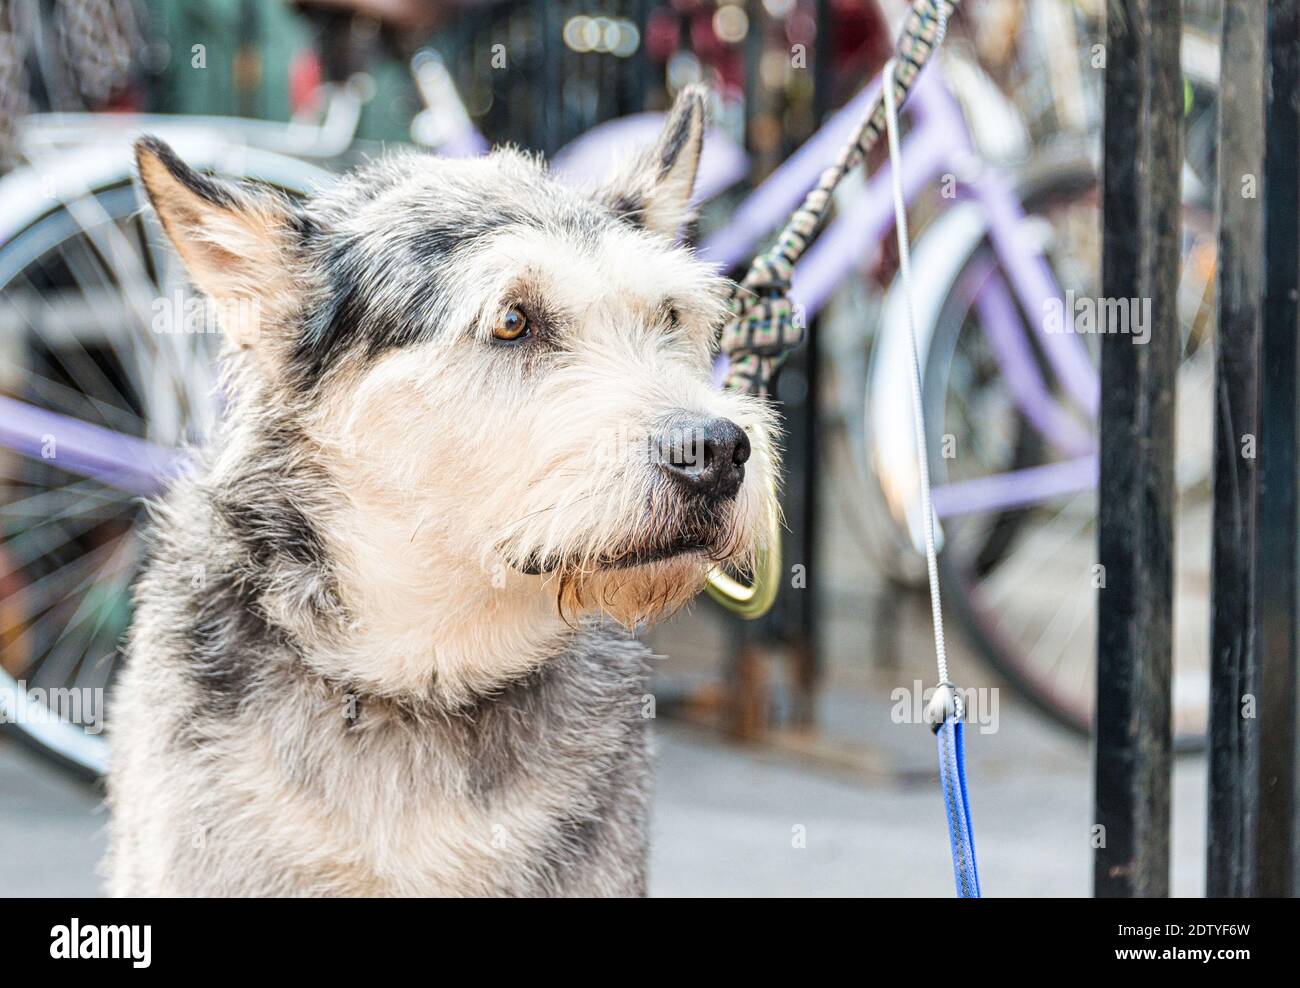 Pet dog tied to a metal structure in a city sidewalk Stock Photo